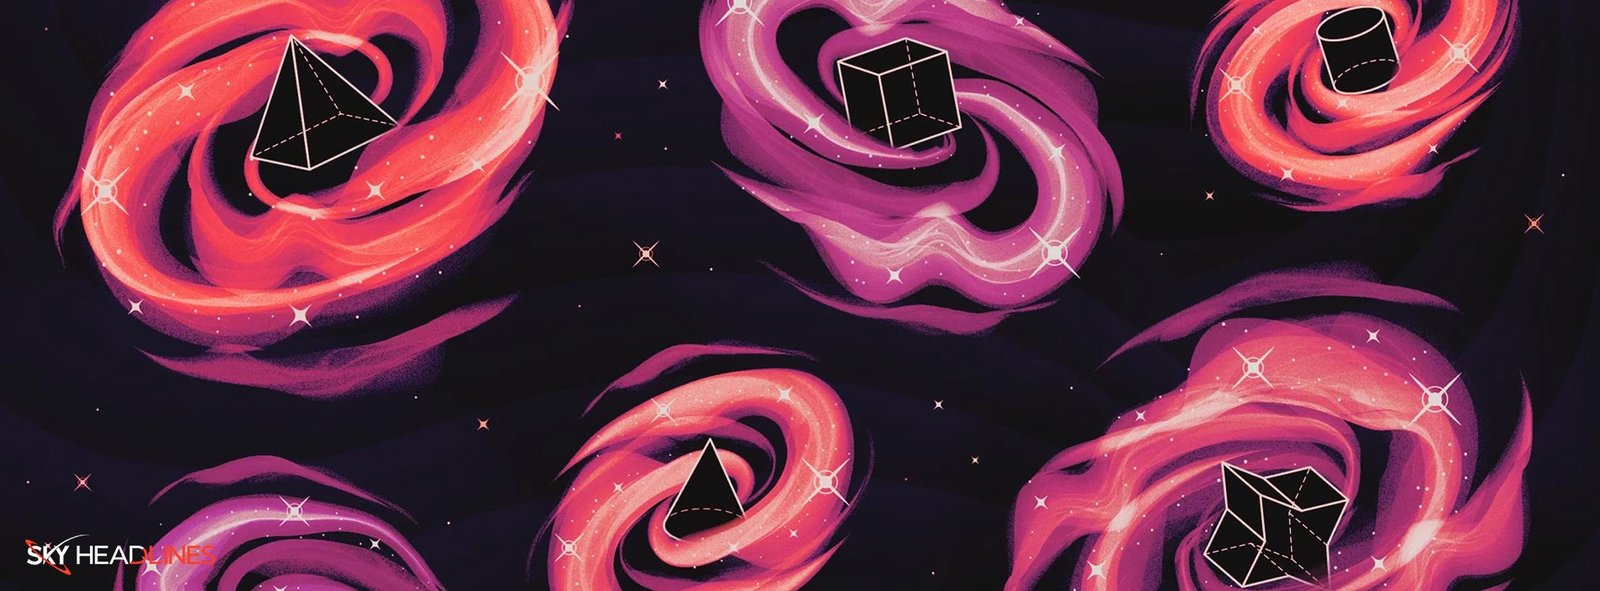 Black Holes can Form Infinite Shapes